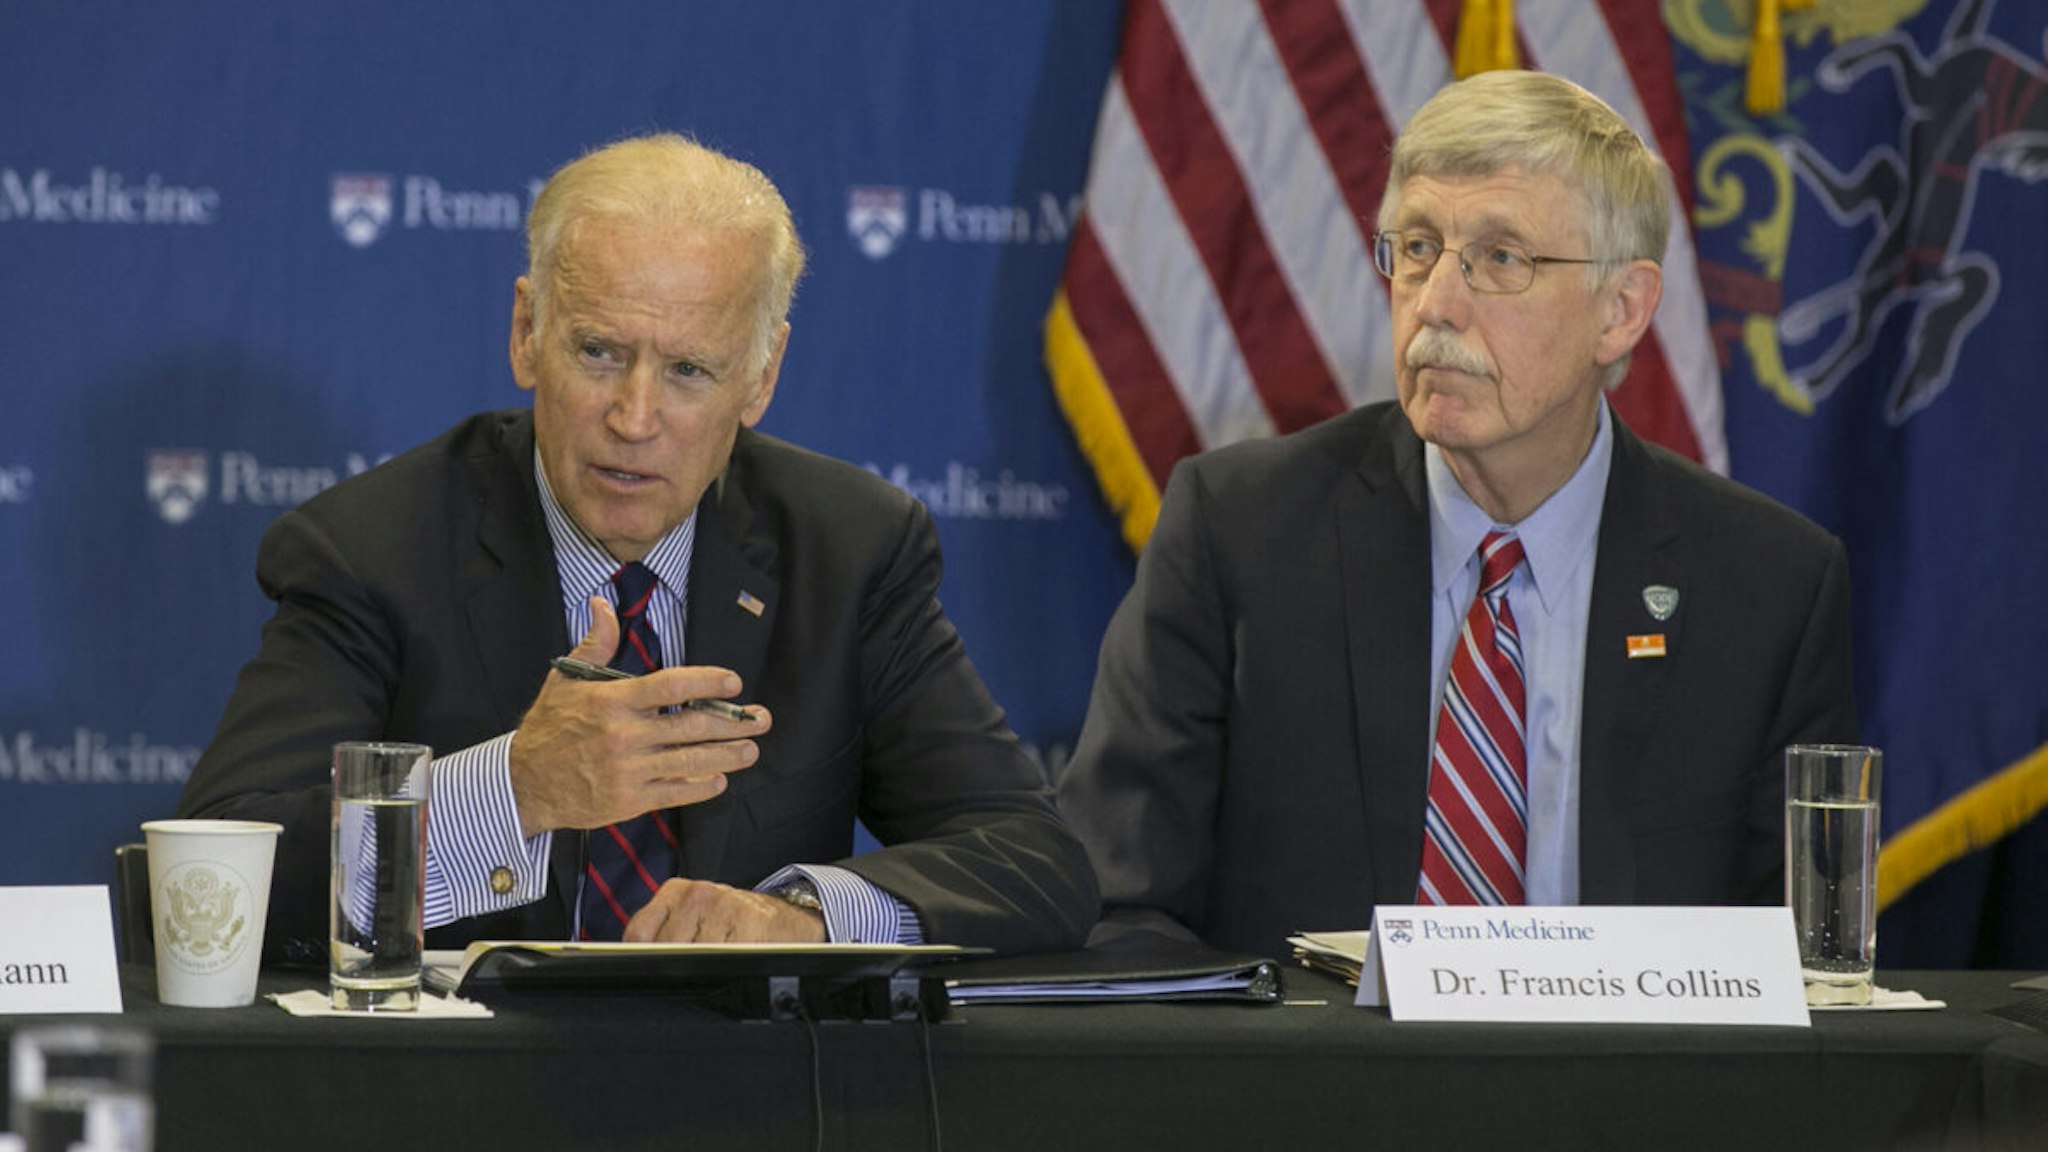 Vice president Joe Biden launches his "Moon Shot" mission to cure cancer with a tour of the University of Pennsylvania's Abramson Cancer Center and a roundtable conversation with researchers there on Friday, Jan. 15, 2016.